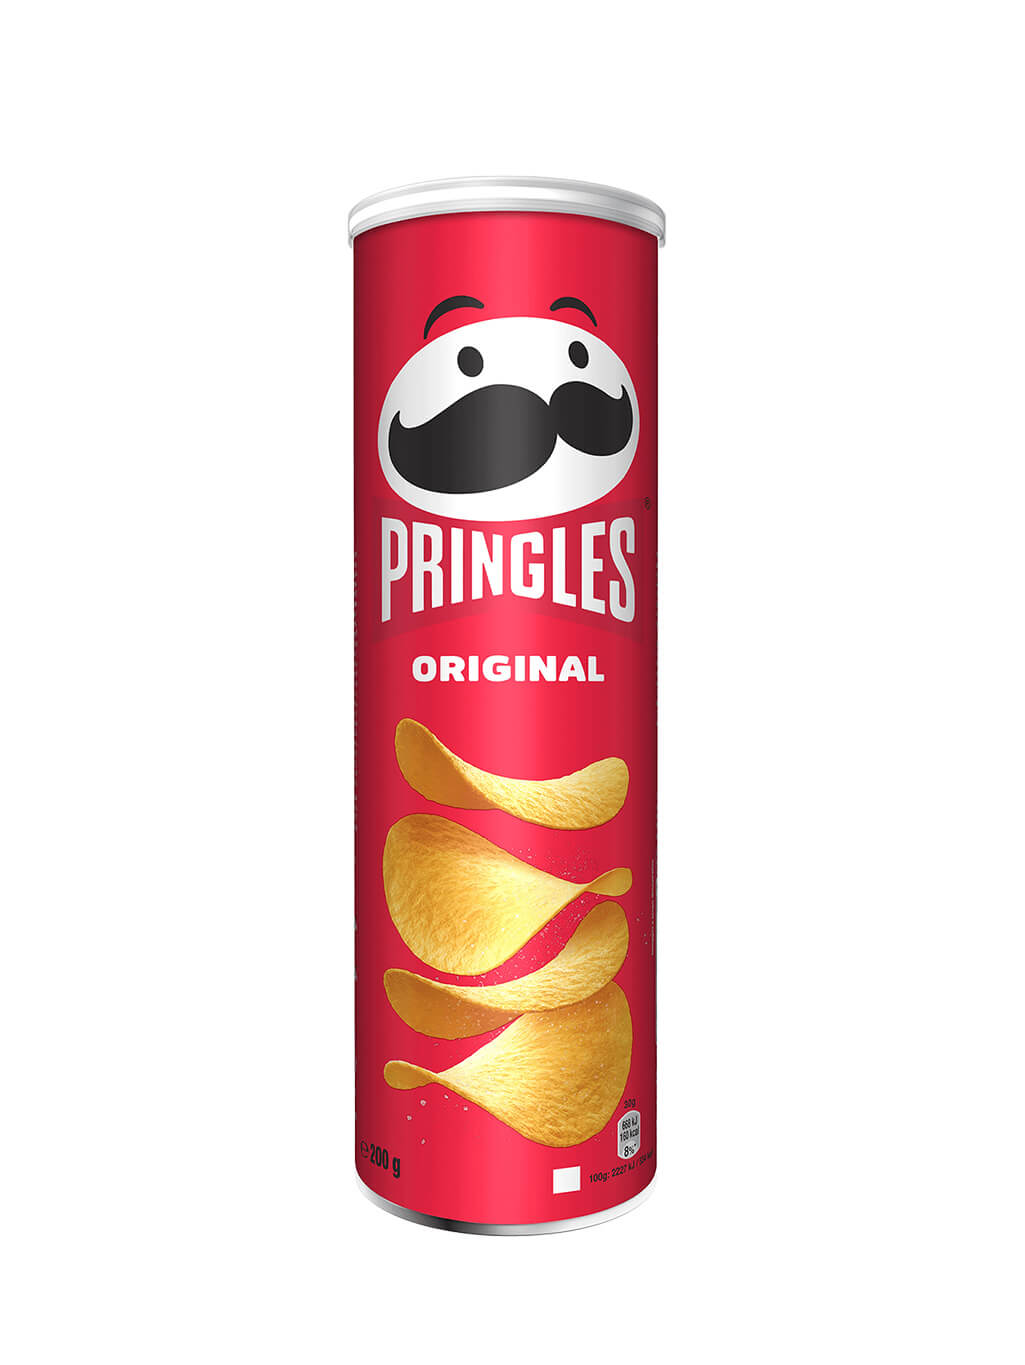 Pringles can and gloves